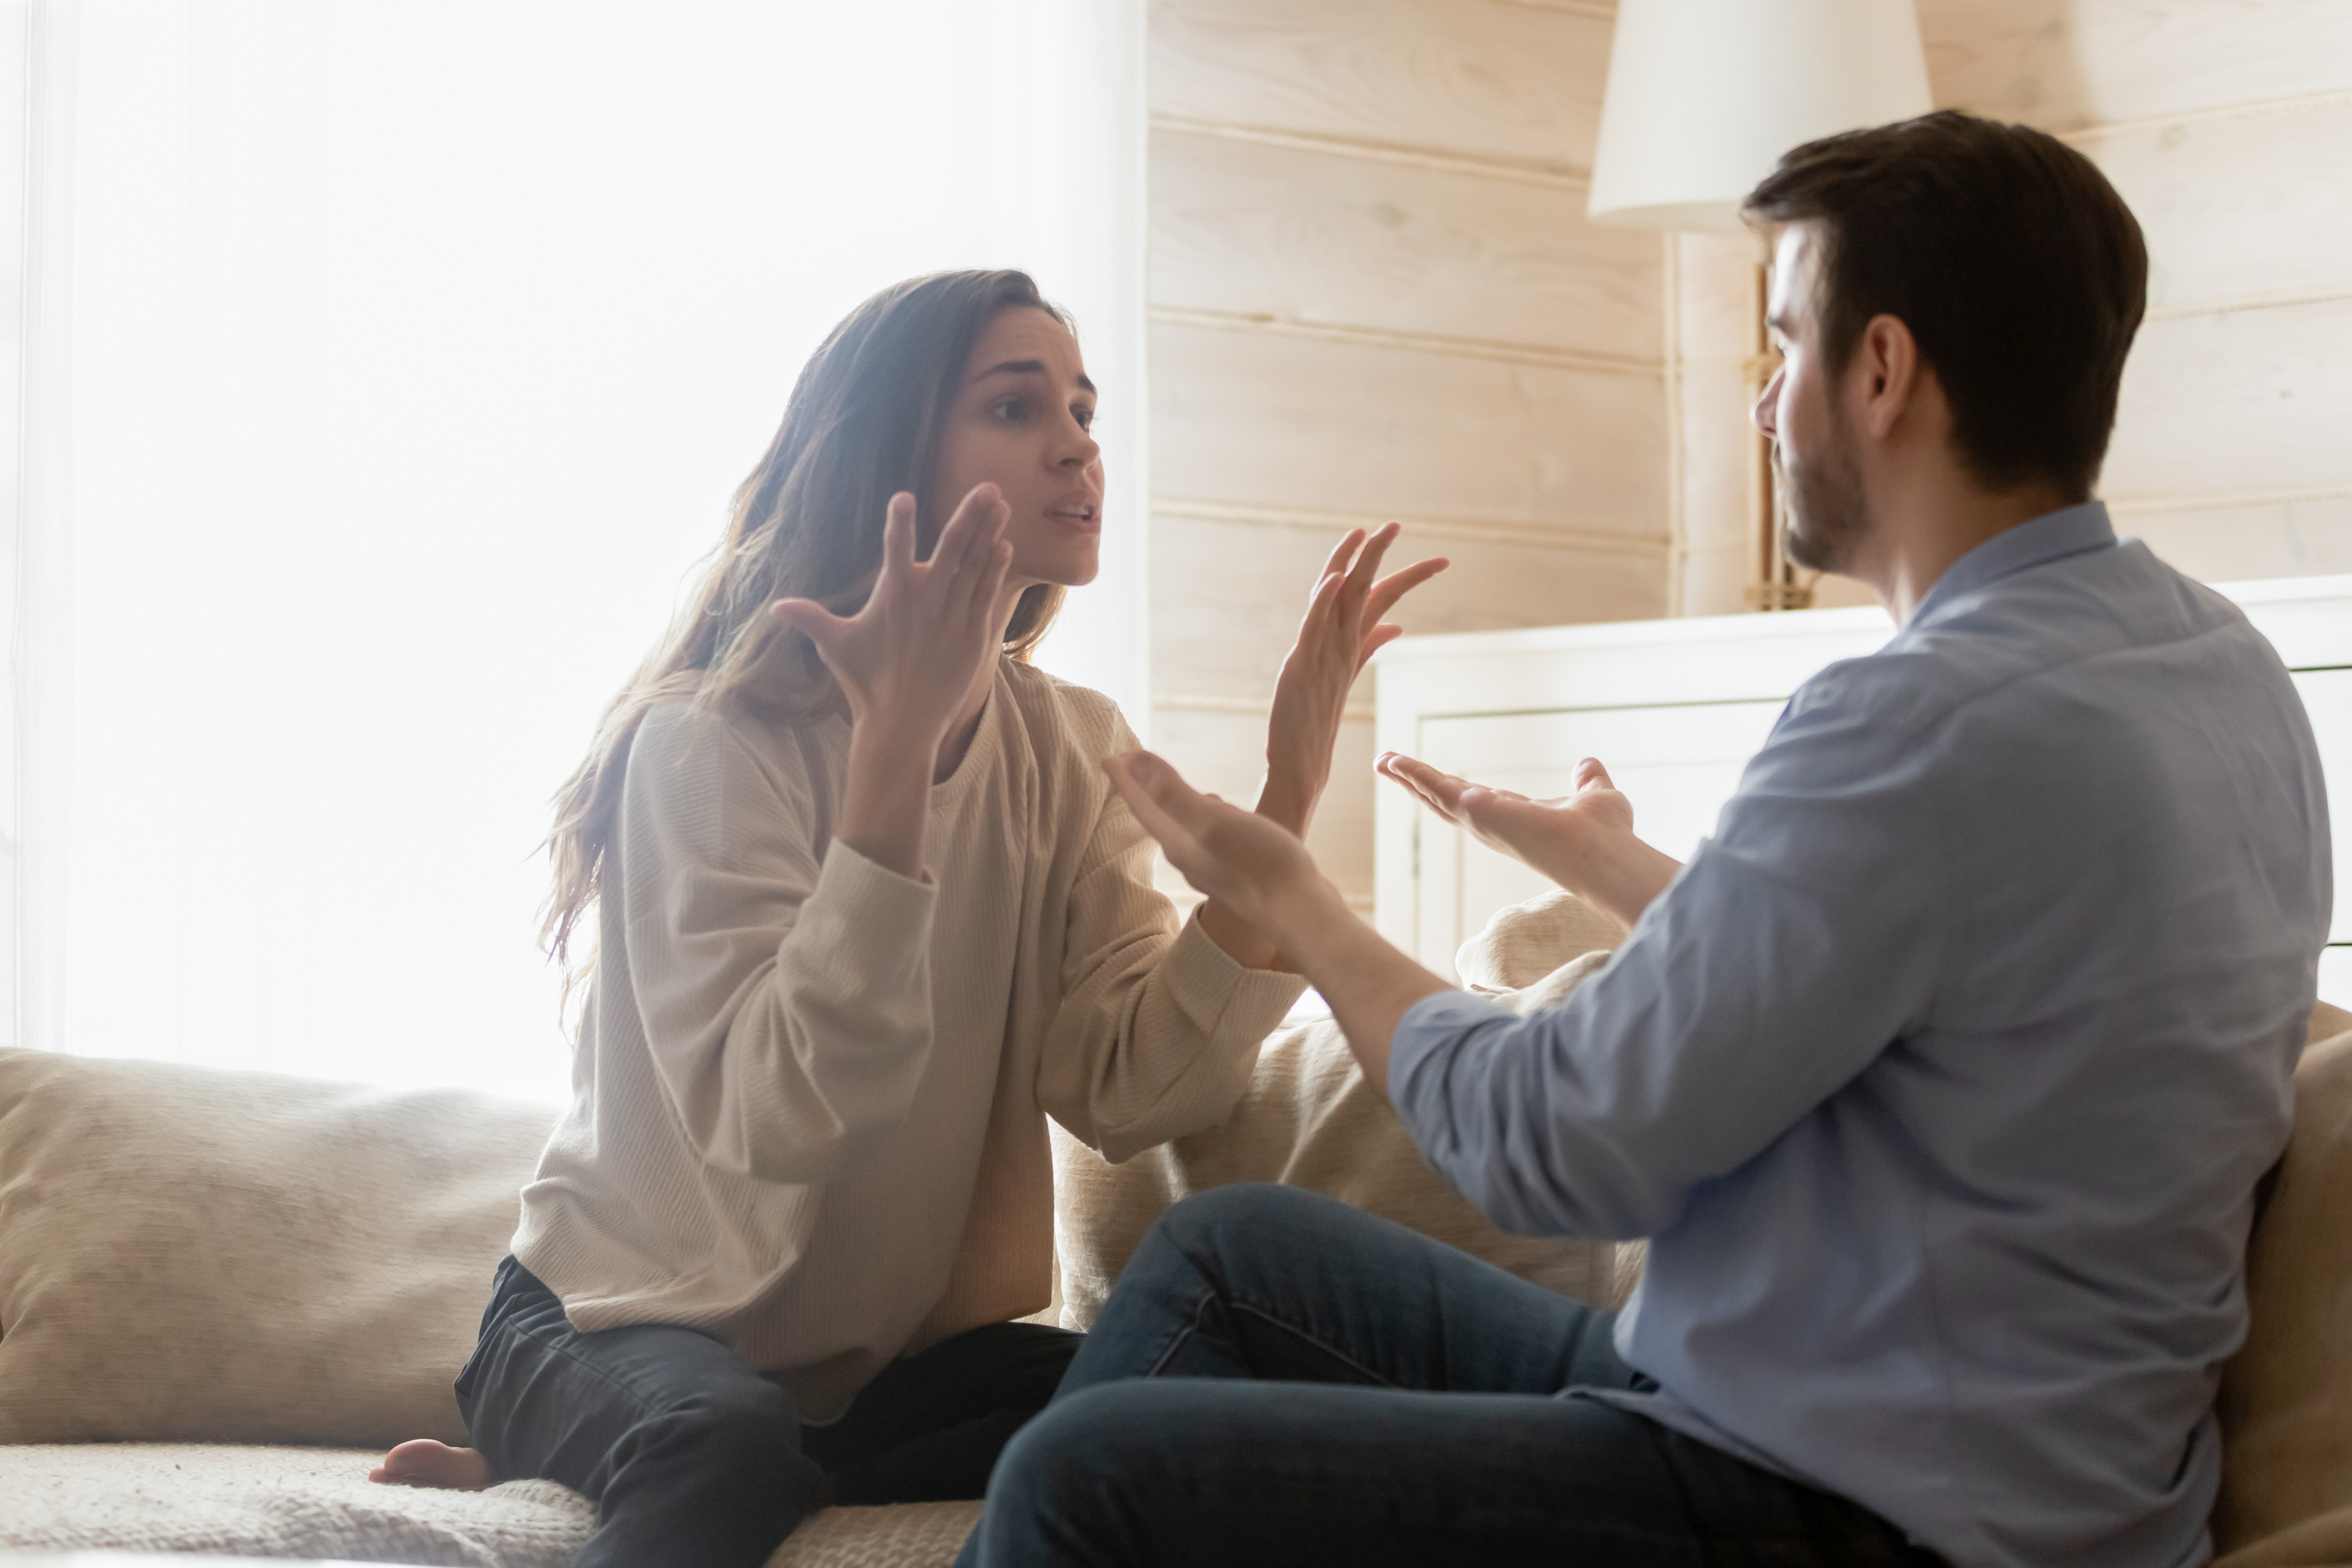 A couple arguing at home | Source: Shutterstock